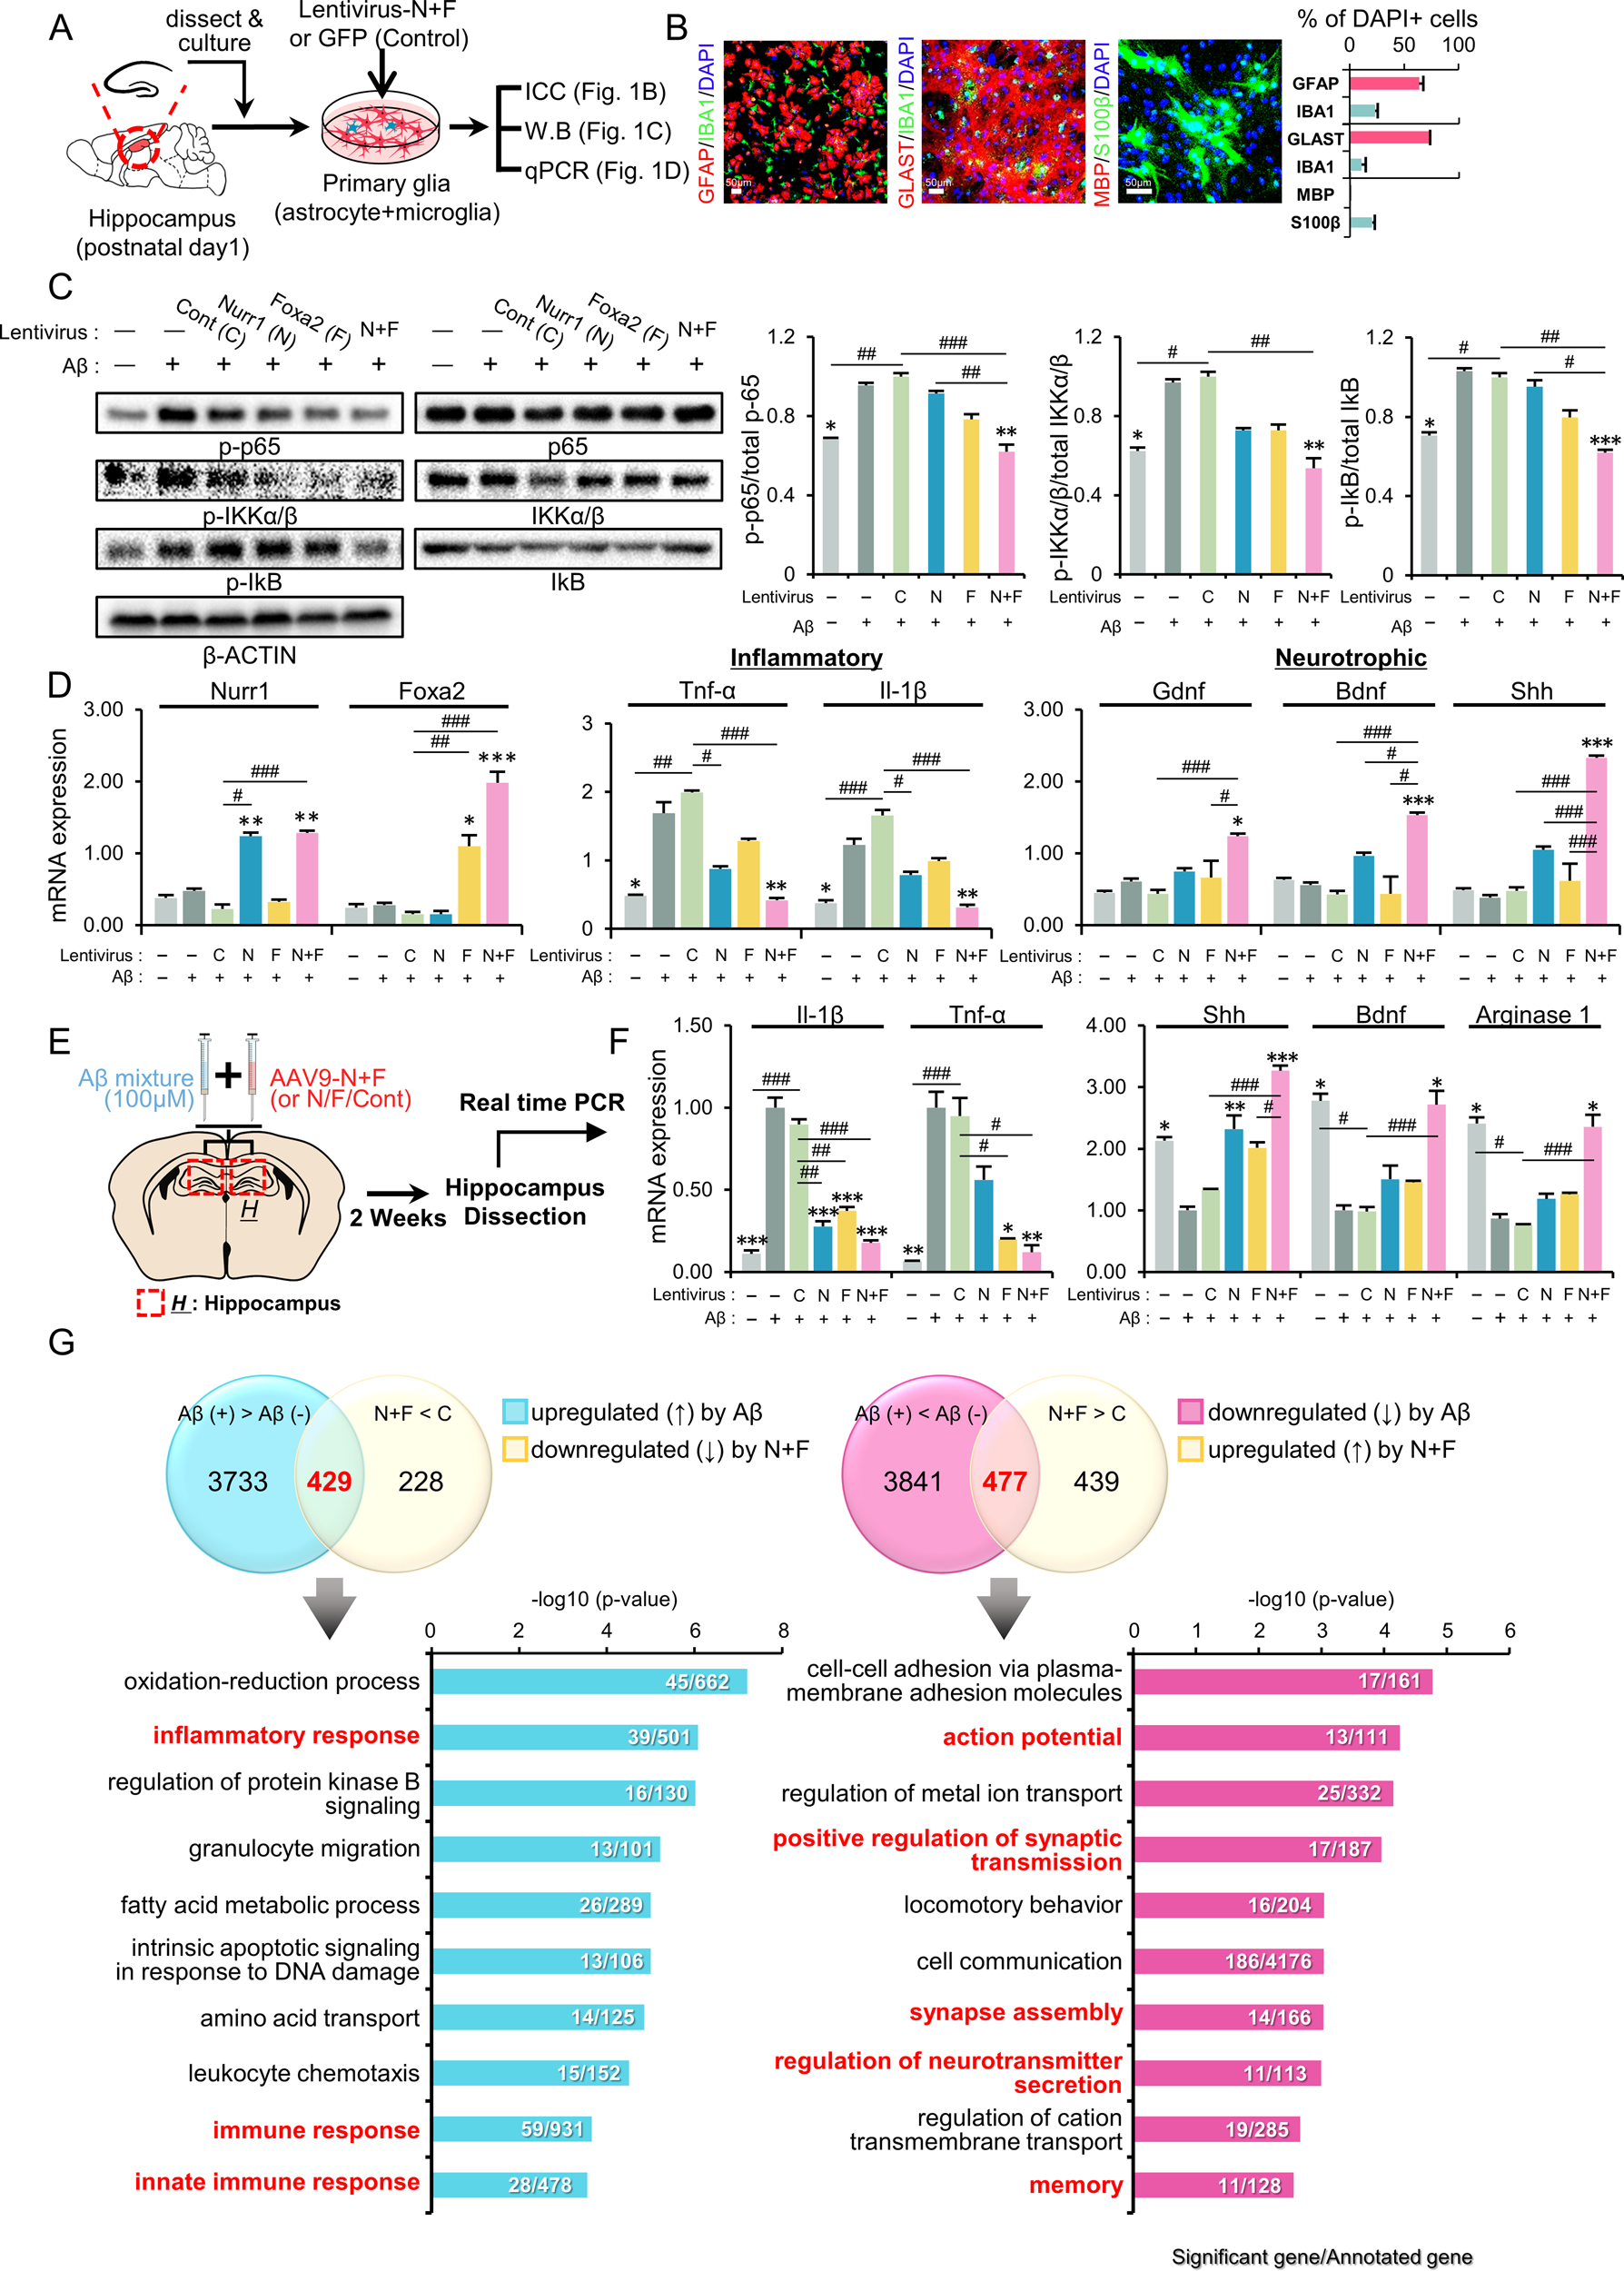 Adeno-associated virus (AAV) 9-mediated gene delivery of Nurr1 and Foxa2  ameliorates symptoms and pathologies of Alzheimer disease model mice by  suppressing neuro-inflammation and glial pathology | Molecular Psychiatry